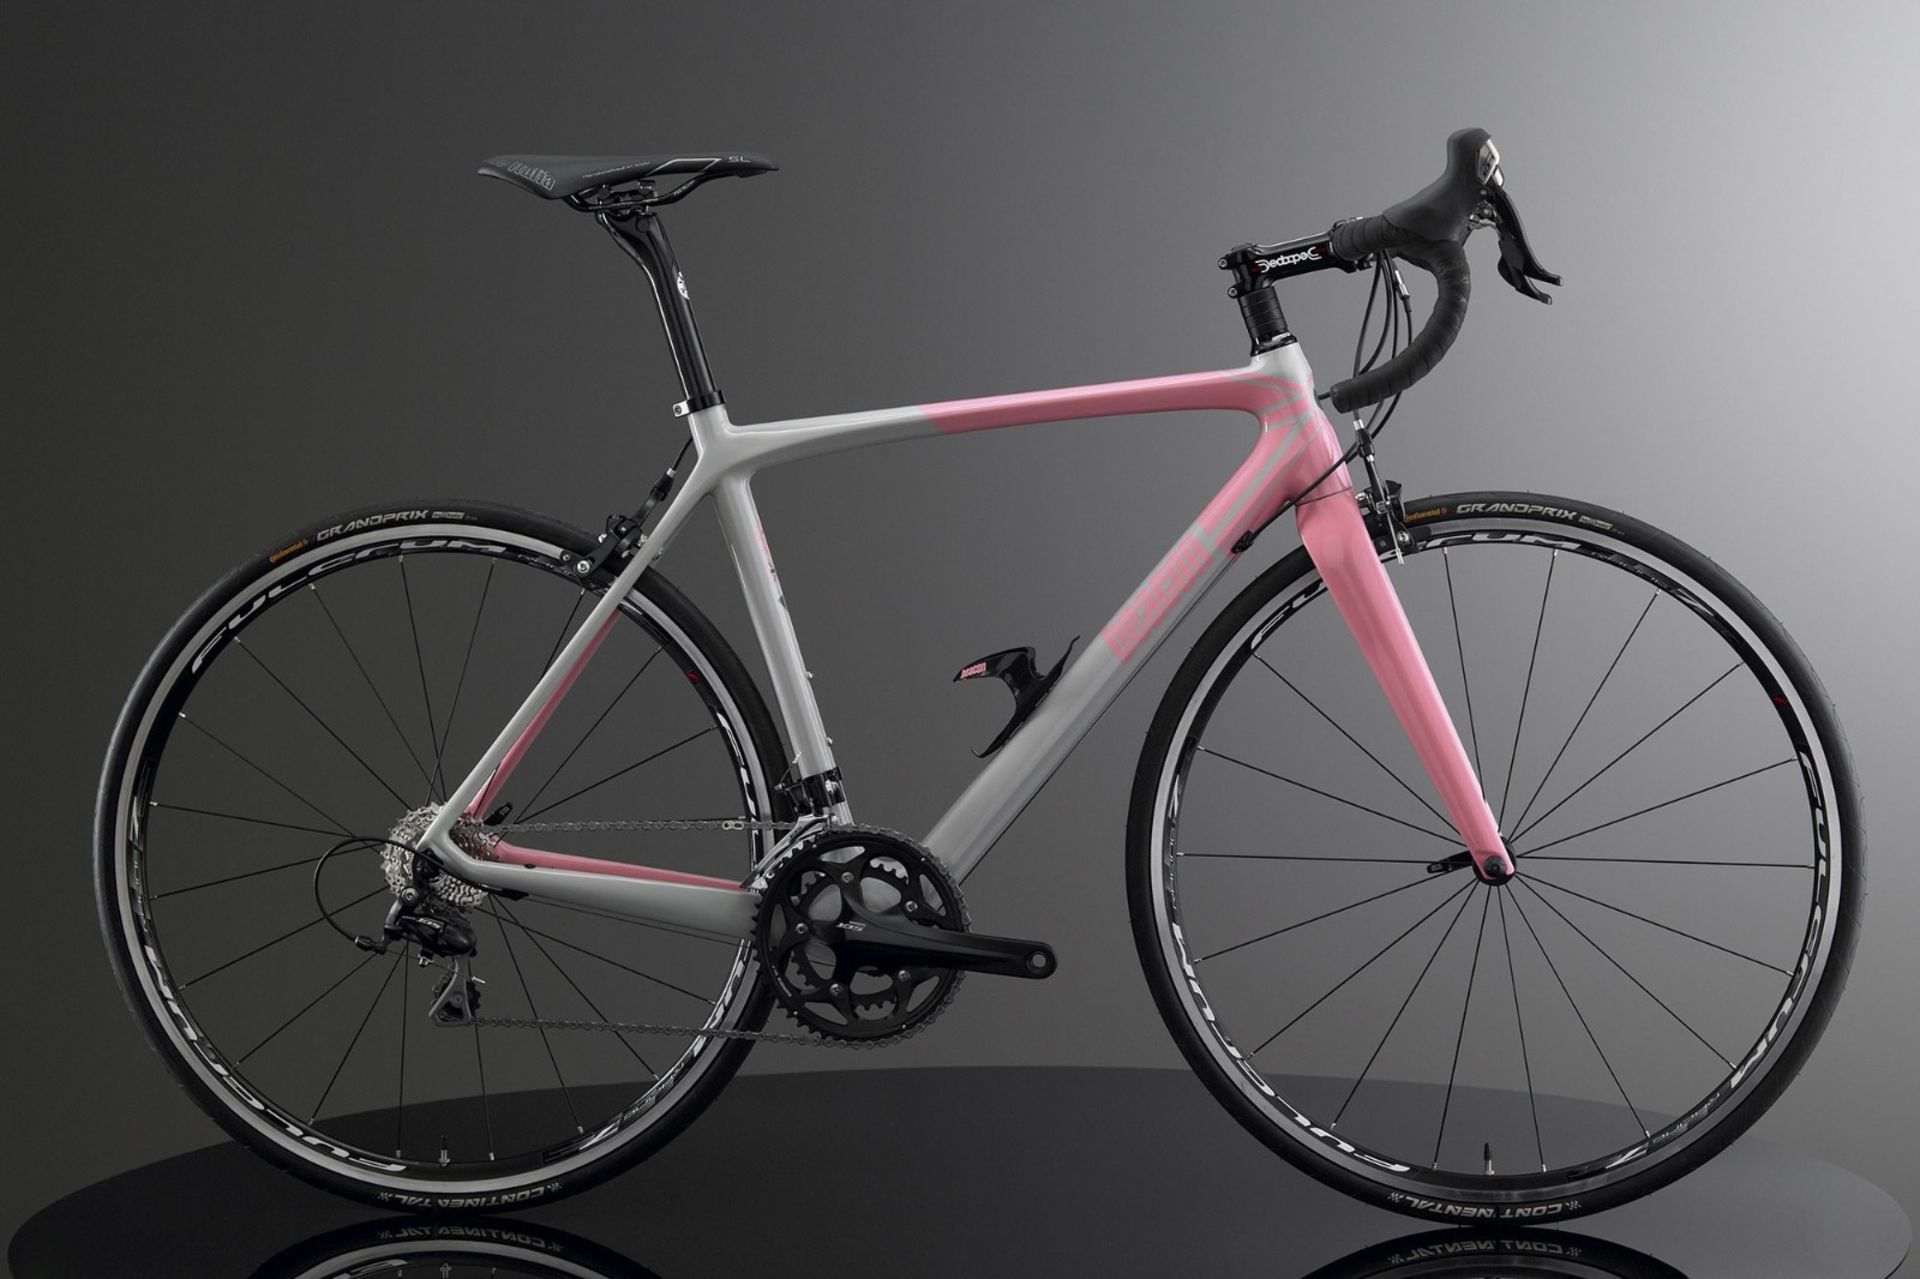 1 x Beacon Model BF-70, Size 590, Carbon Fibre Bike Frame in Light Grey & Pink. - Image 2 of 3